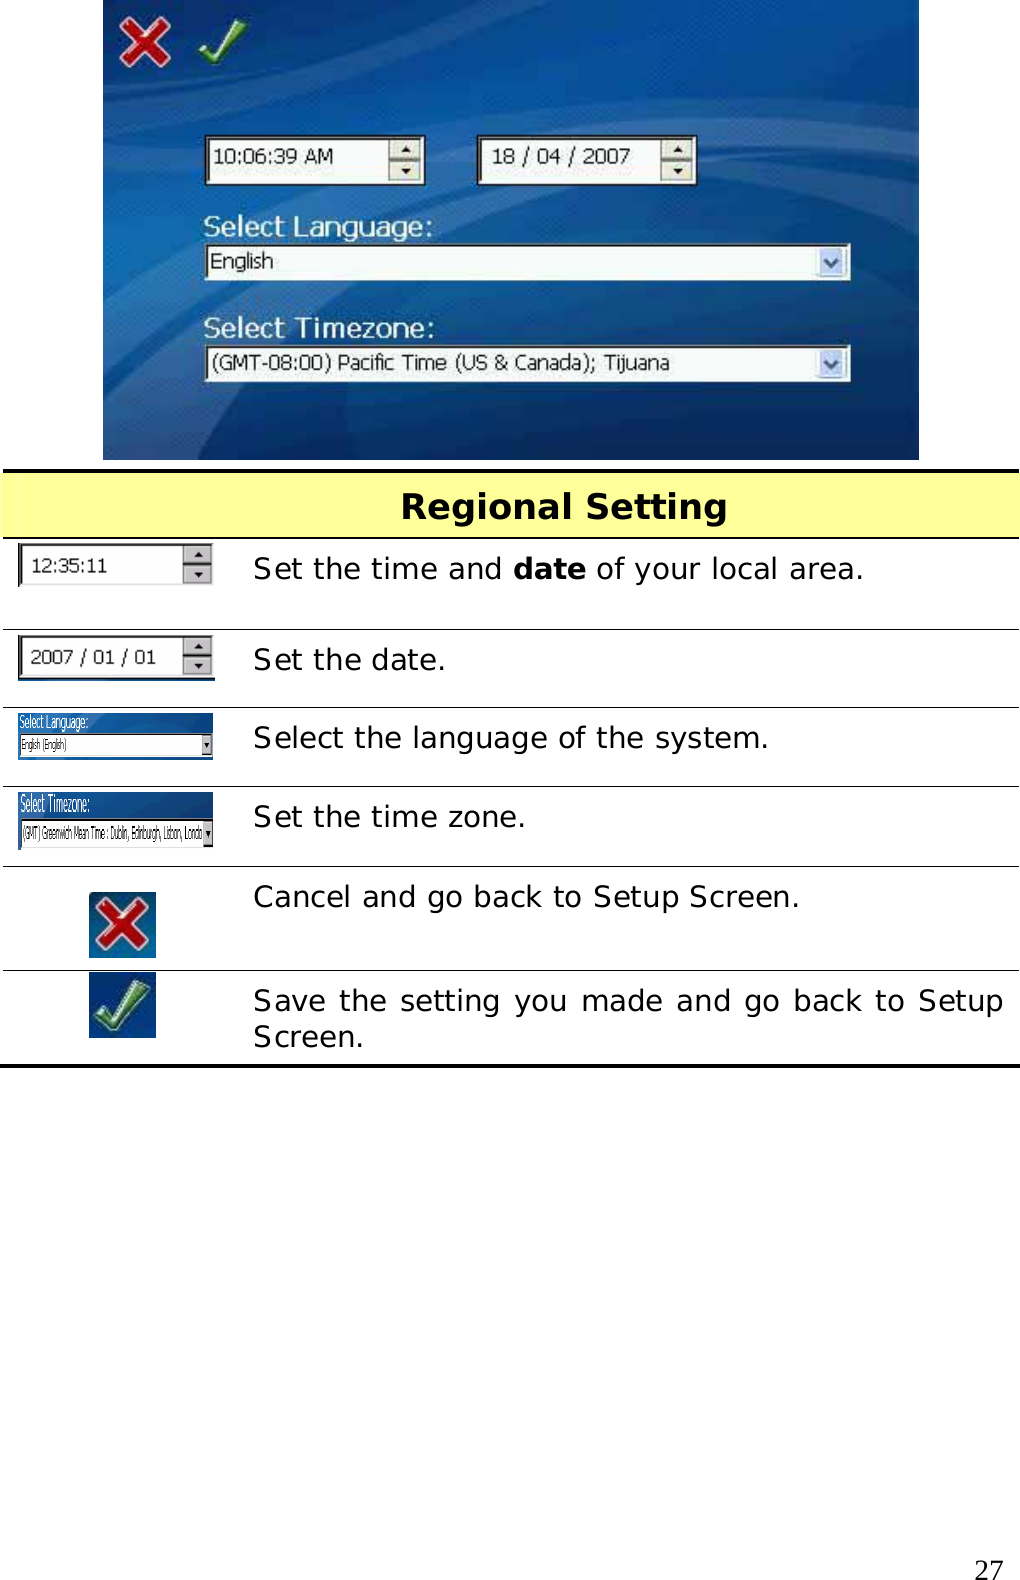  27 Regional Setting  Set the time and date of your local area.  Set the date.  Select the language of the system.  Set the time zone.  Cancel and go back to Setup Screen.  Save the setting you made and go back to Setup Screen.  